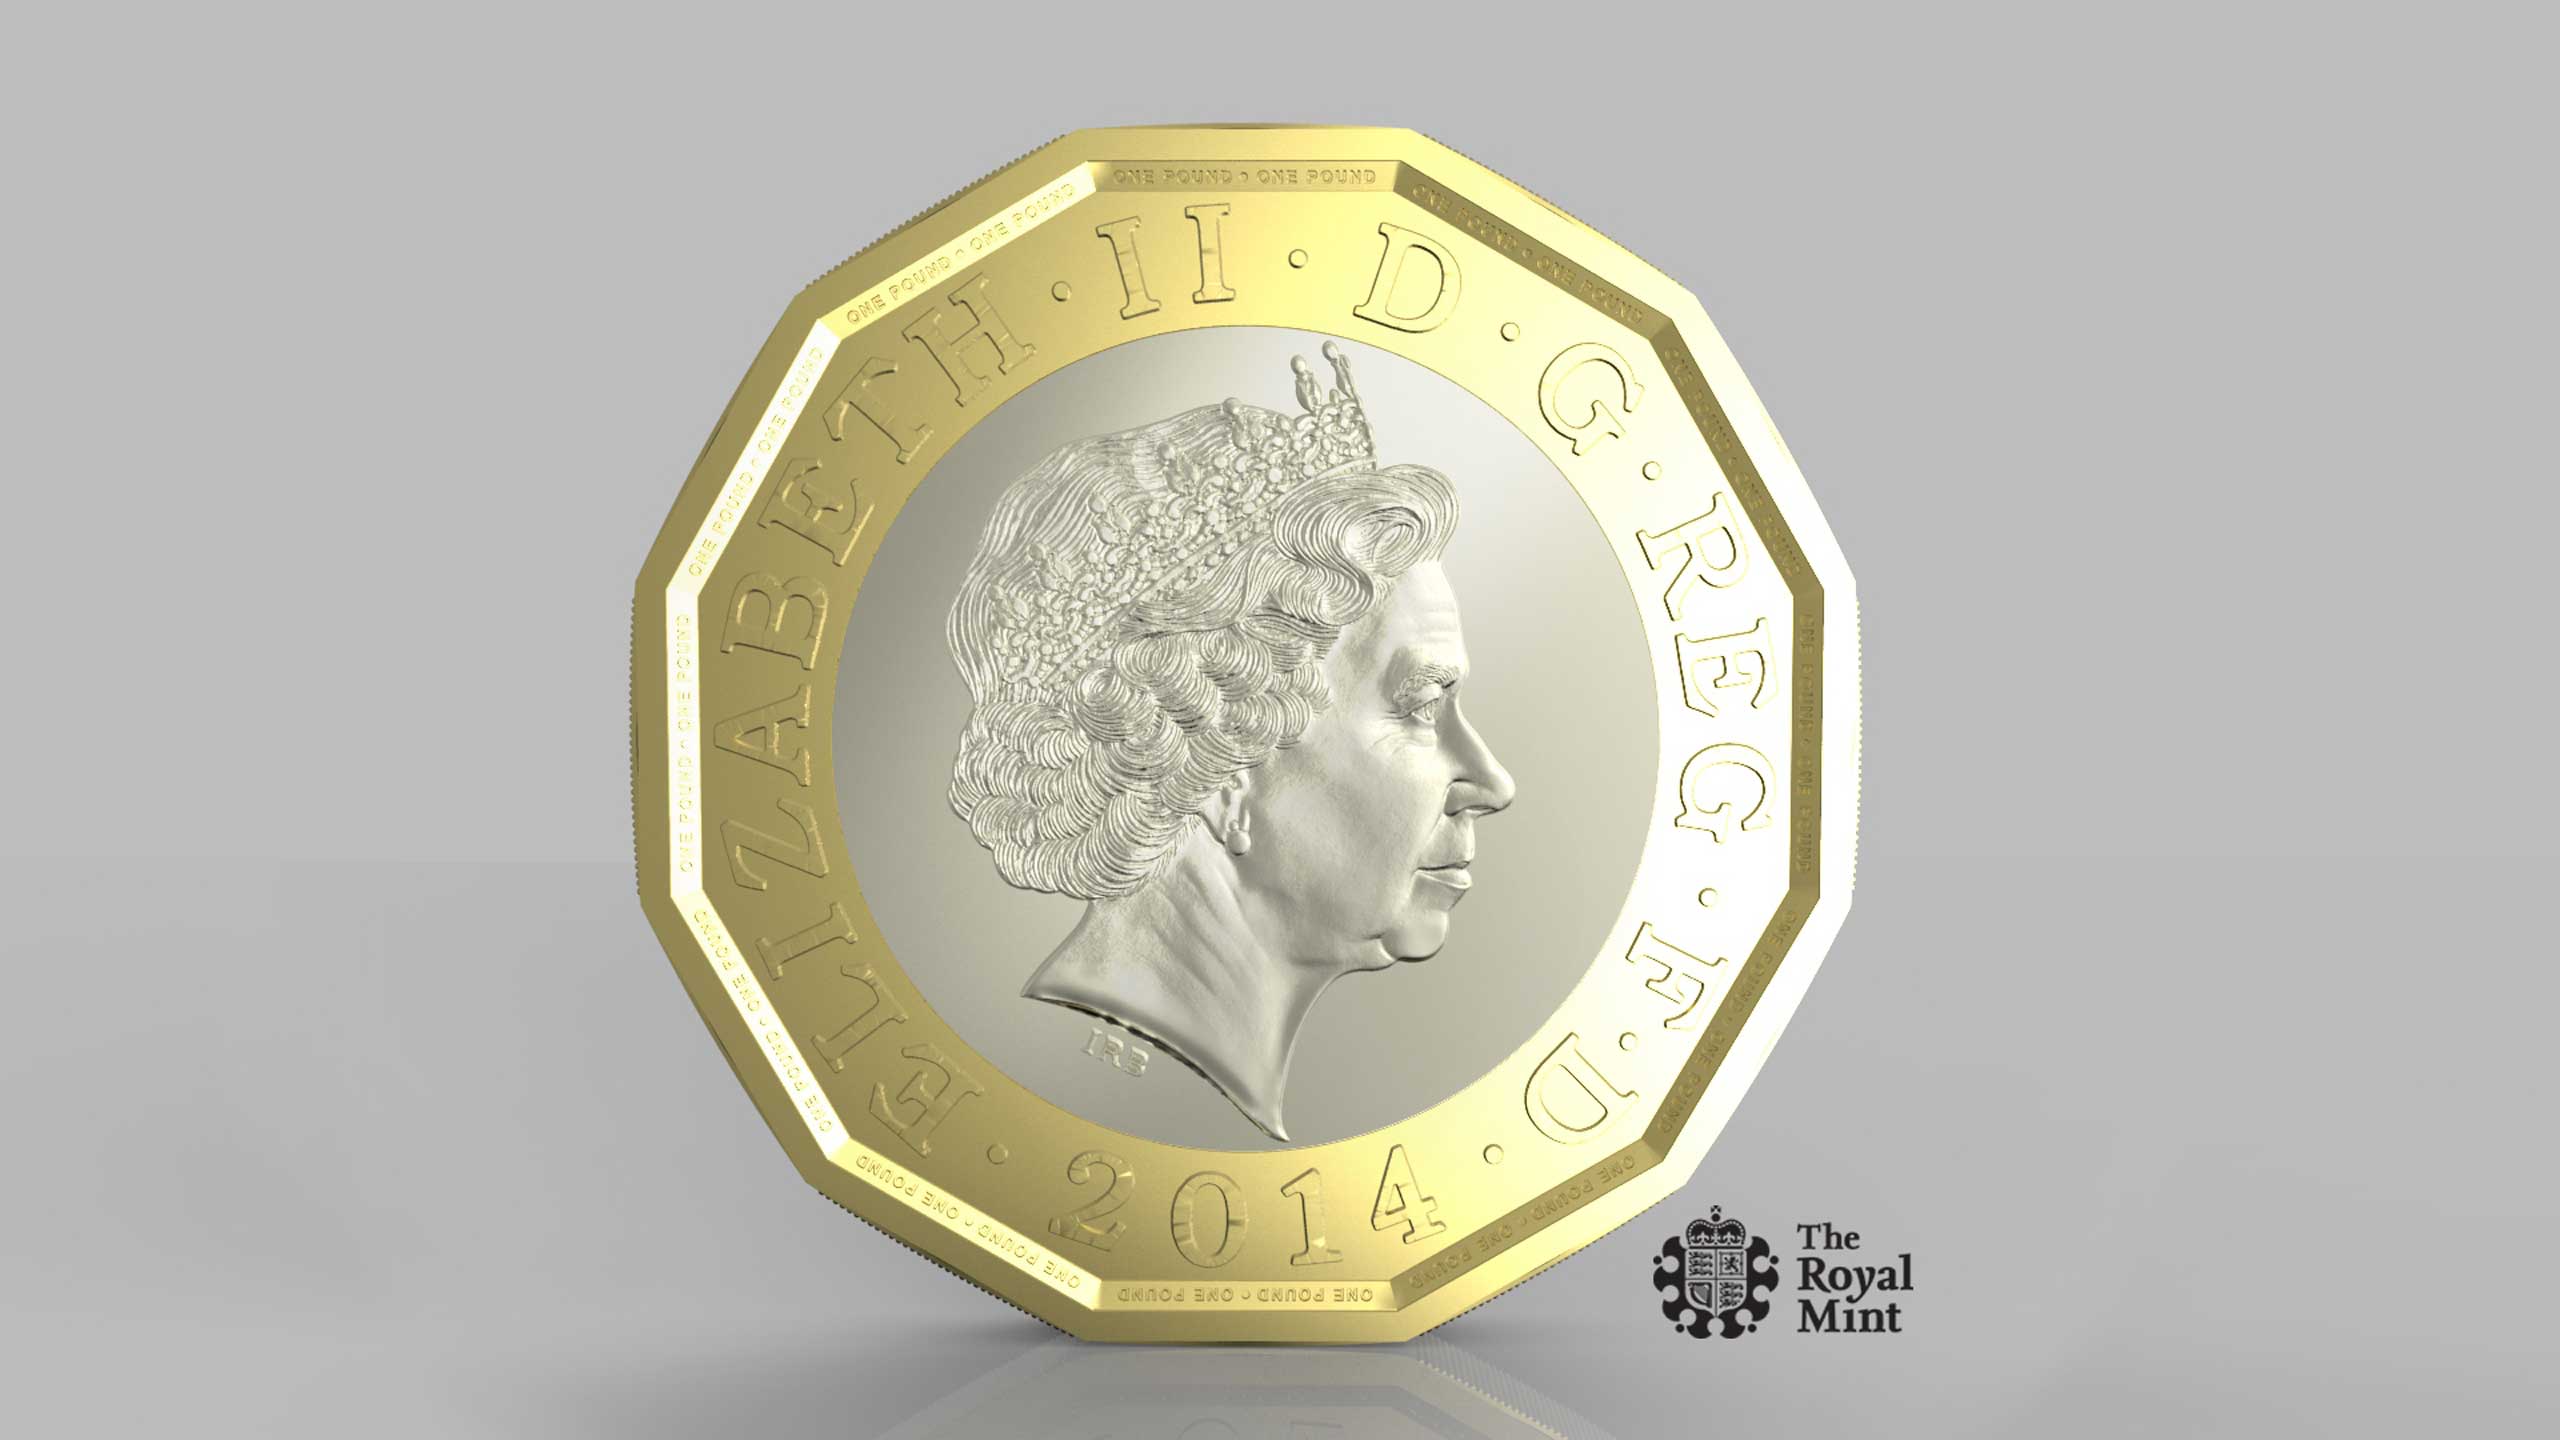 This photo issued by HM Treasury shows the side of a new one pound coin announced by the Government.